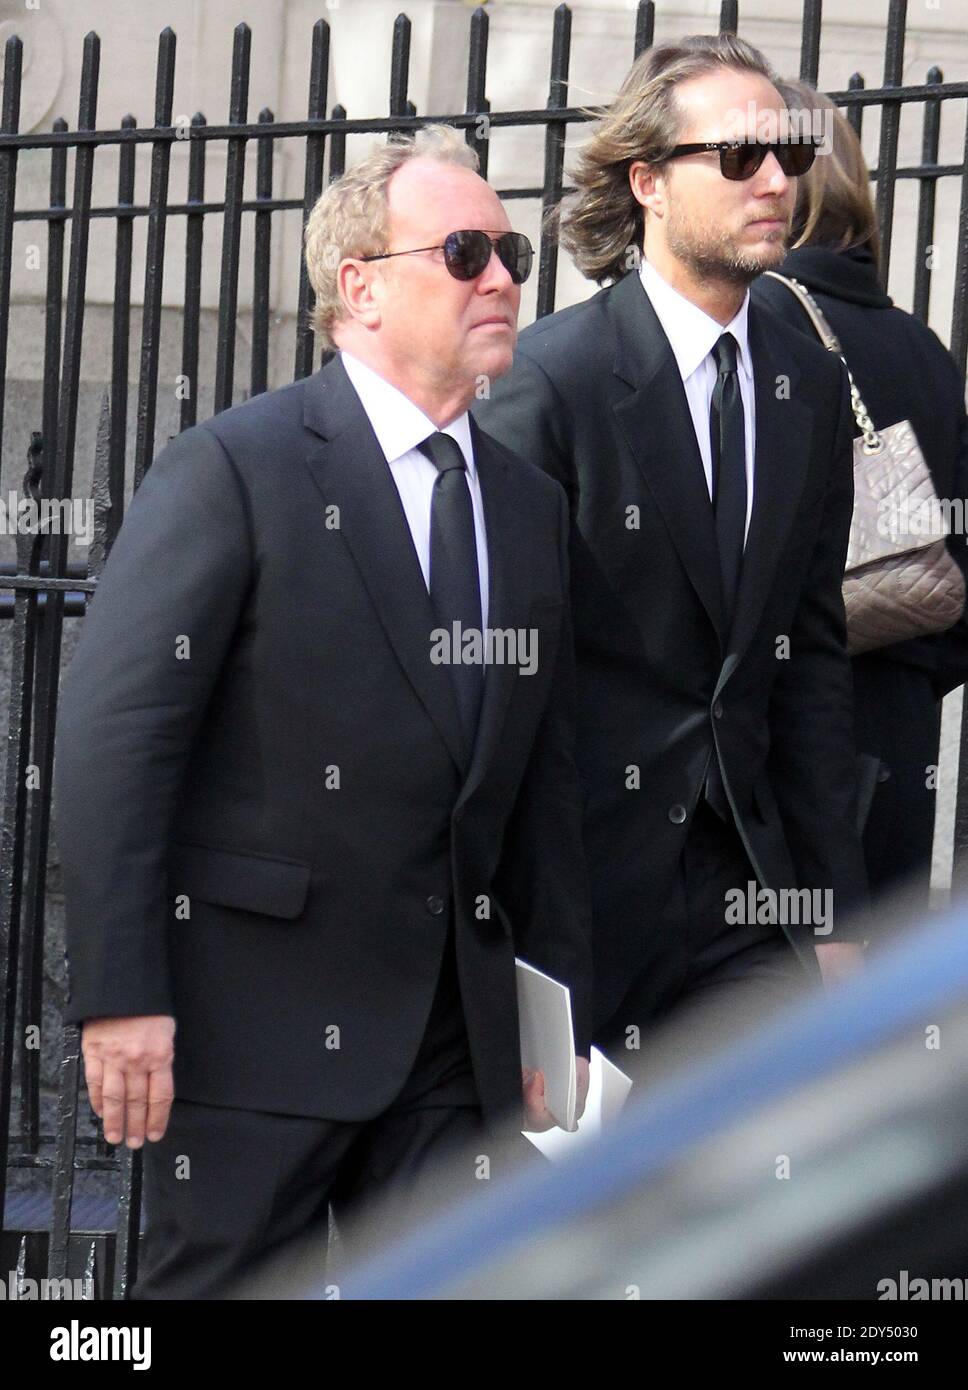 Michael Kors and his husband Lance LePere attend the funeral service of  Oscar De La Rentta at the Church of St. Ignatius Loyola at Park Avenue in  Manhattan, New York City, NY